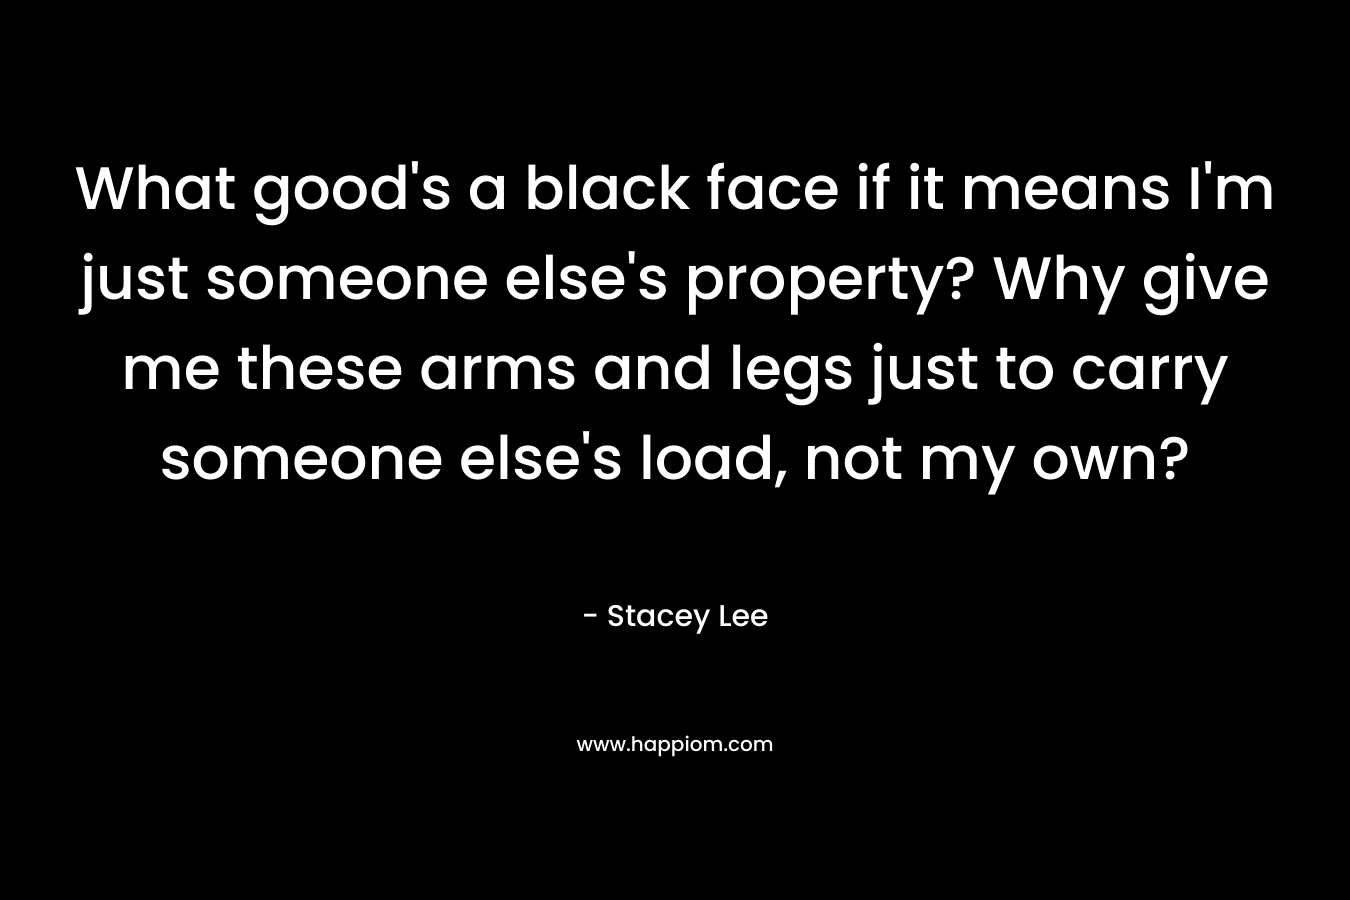 What good’s a black face if it means I’m just someone else’s property? Why give me these arms and legs just to carry someone else’s load, not my own? – Stacey  Lee